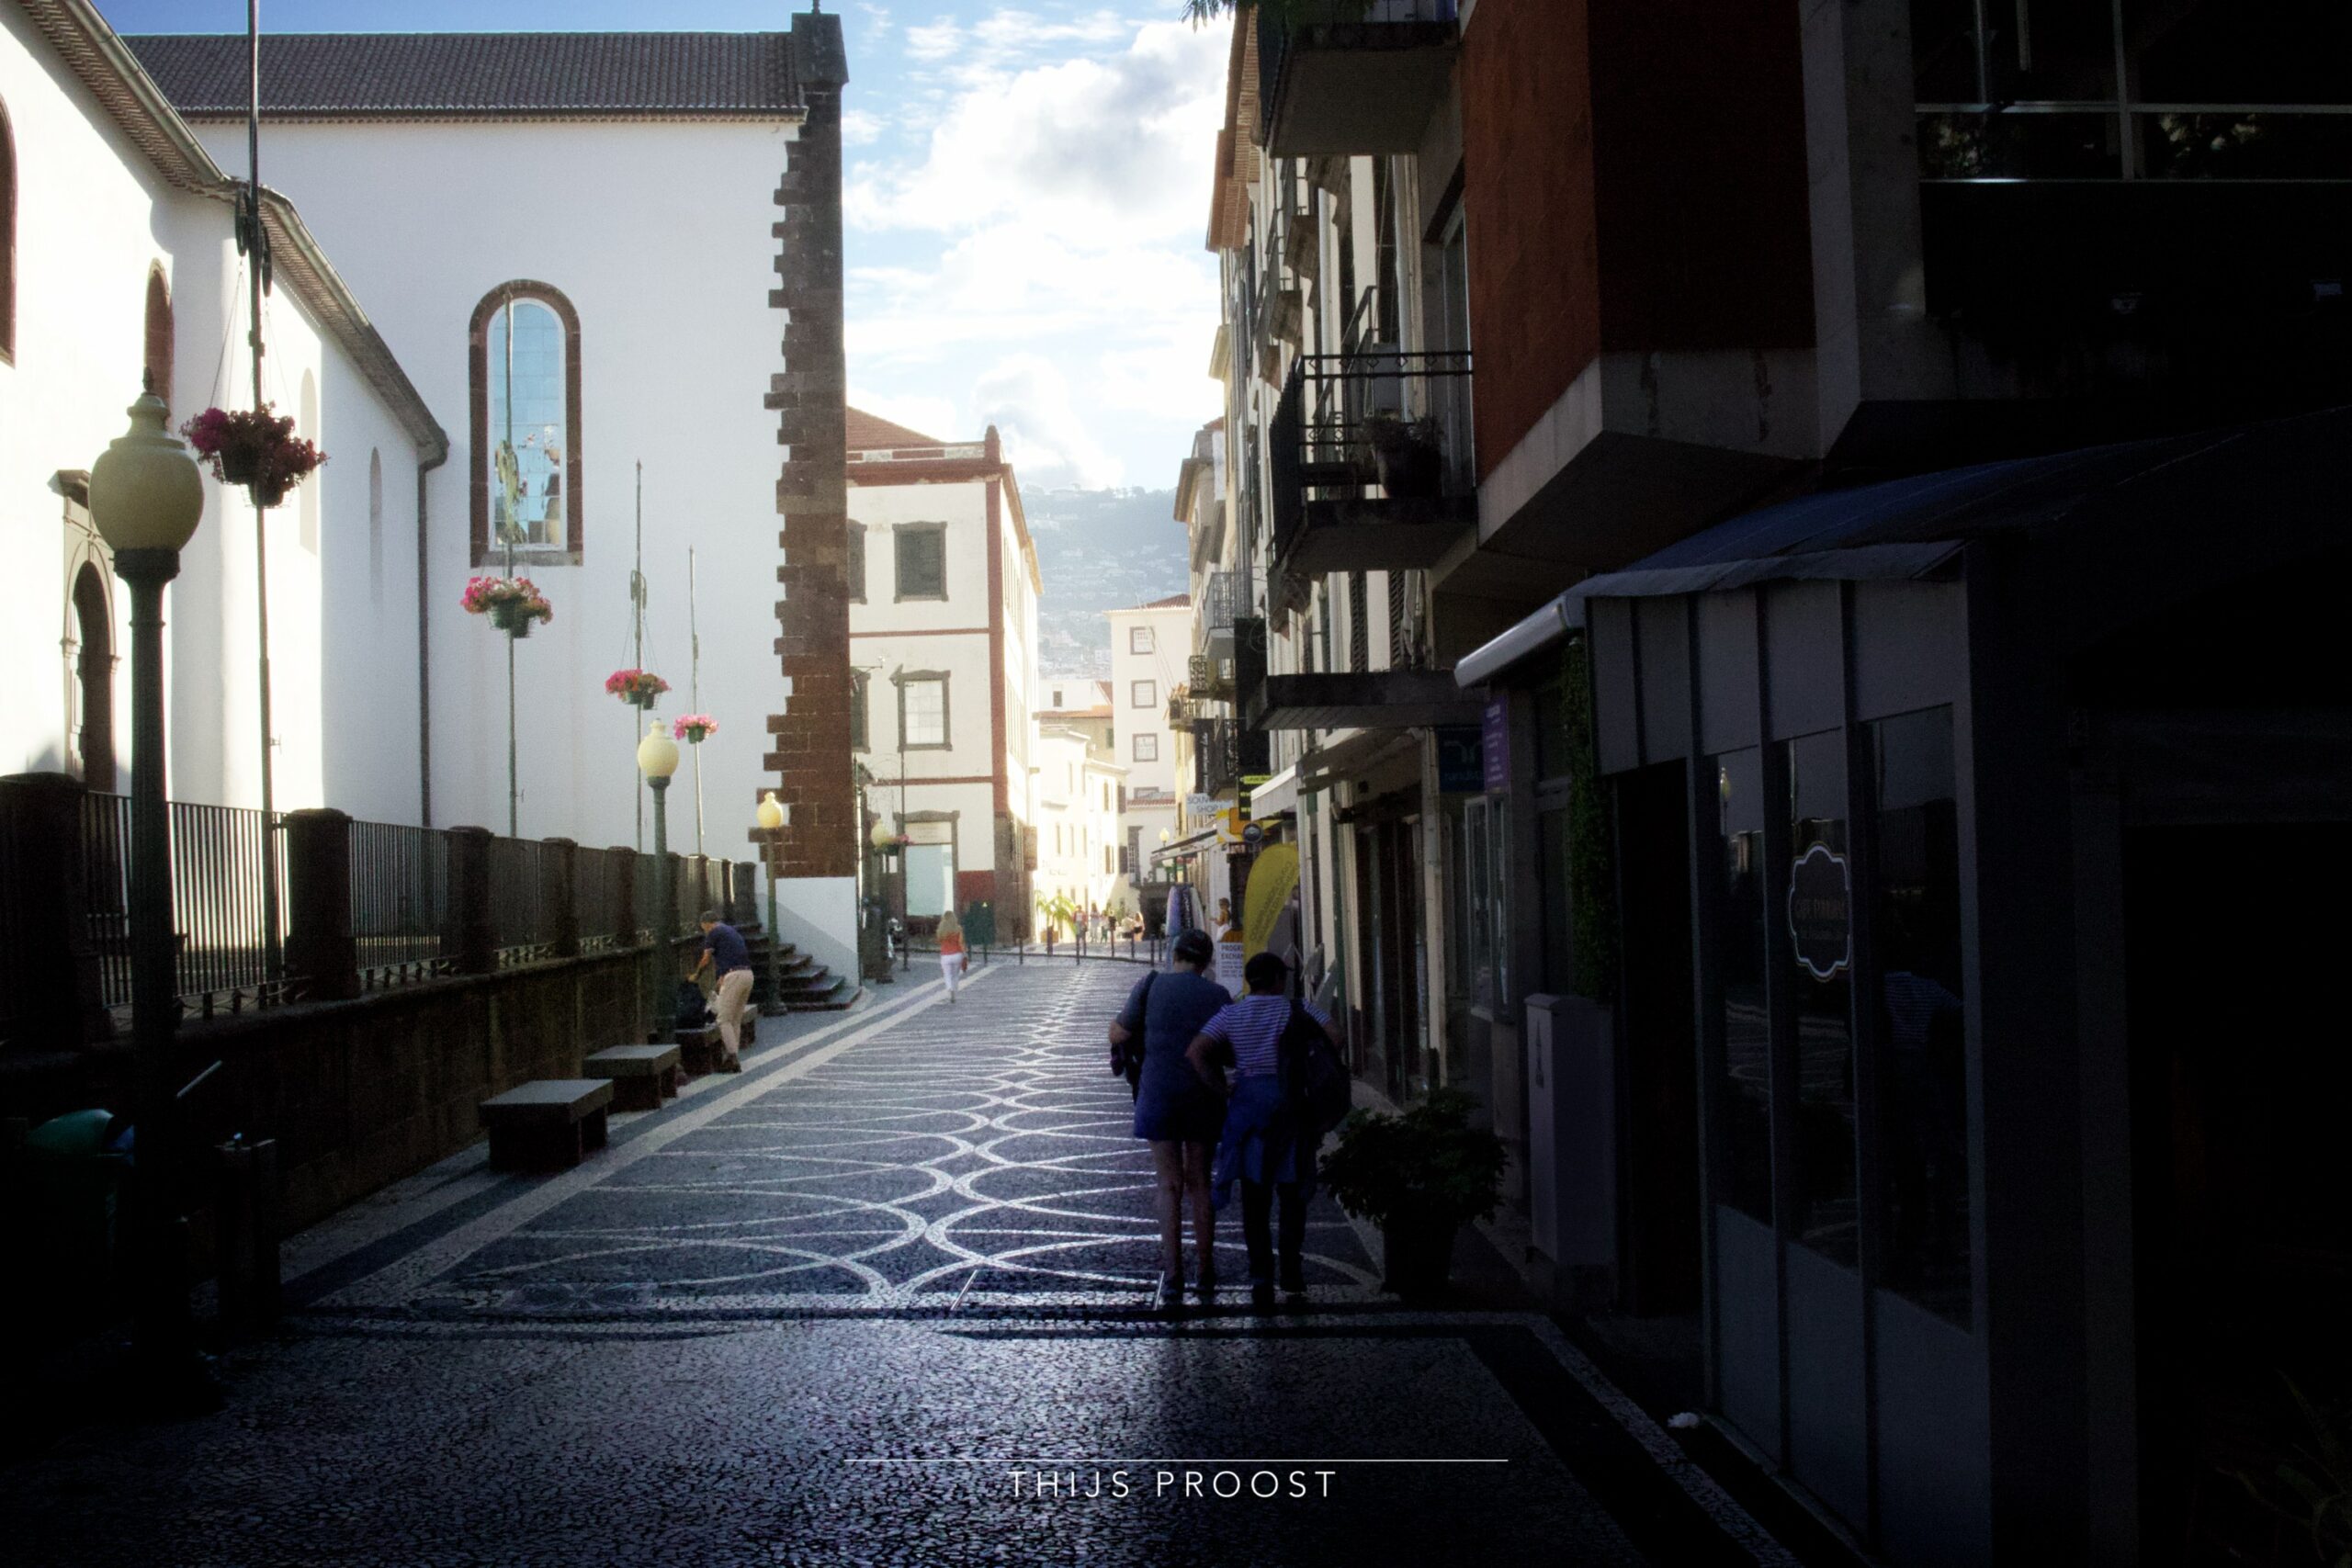 View of a street with a church in the center of Funchal Madeira. The buildings on the right are in the shadow and the church on the left in lightly lit.